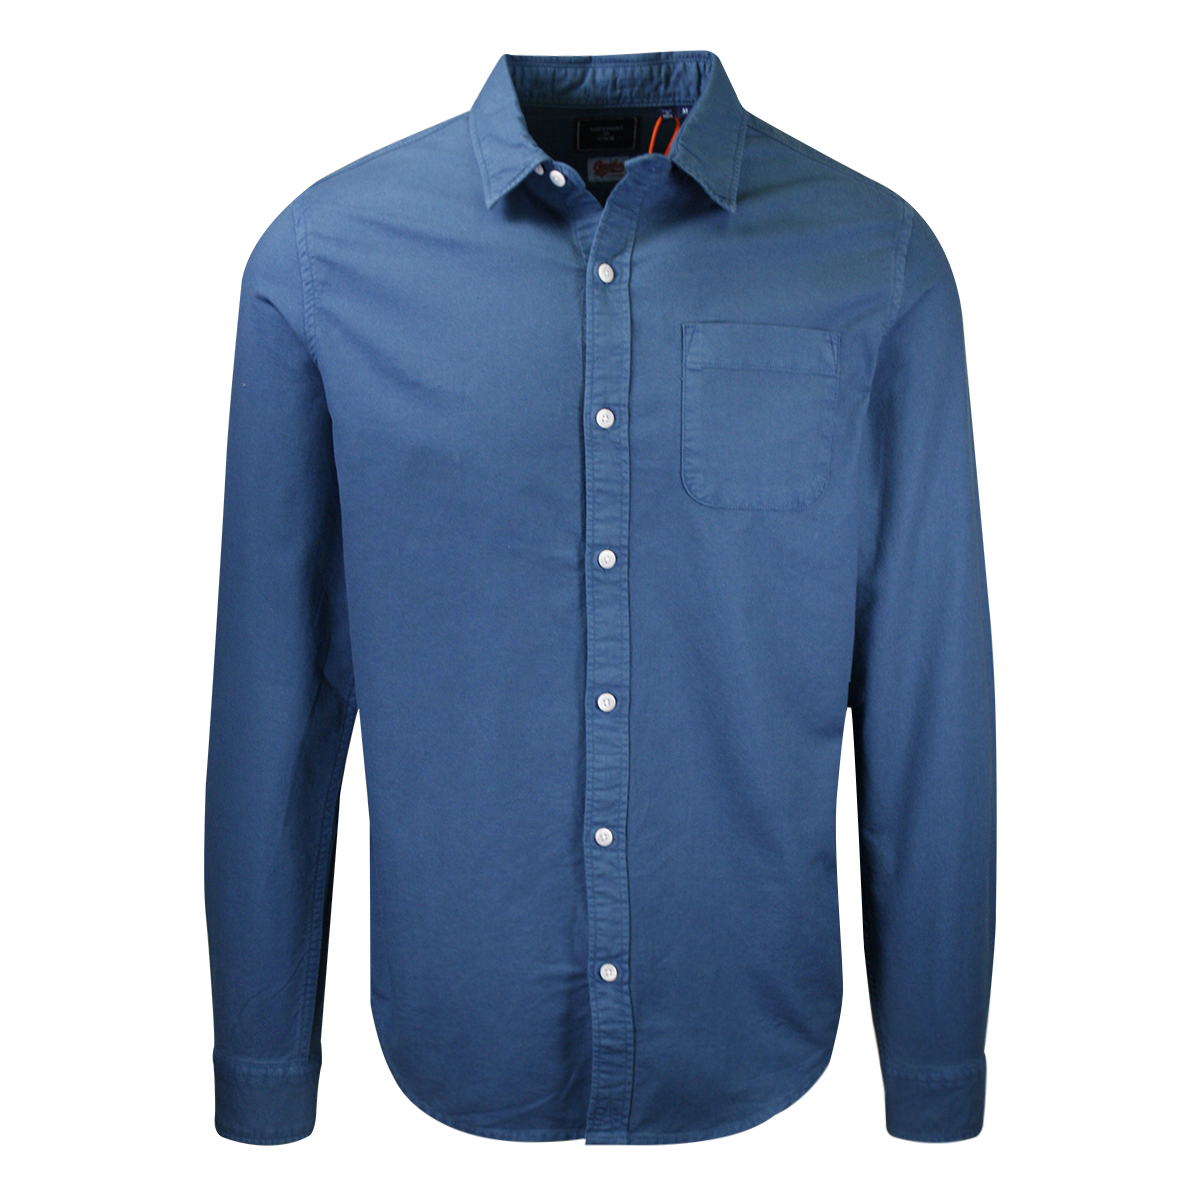 Superdry Men's Indigo Lined Dried Oxford L/S Woven Shirt